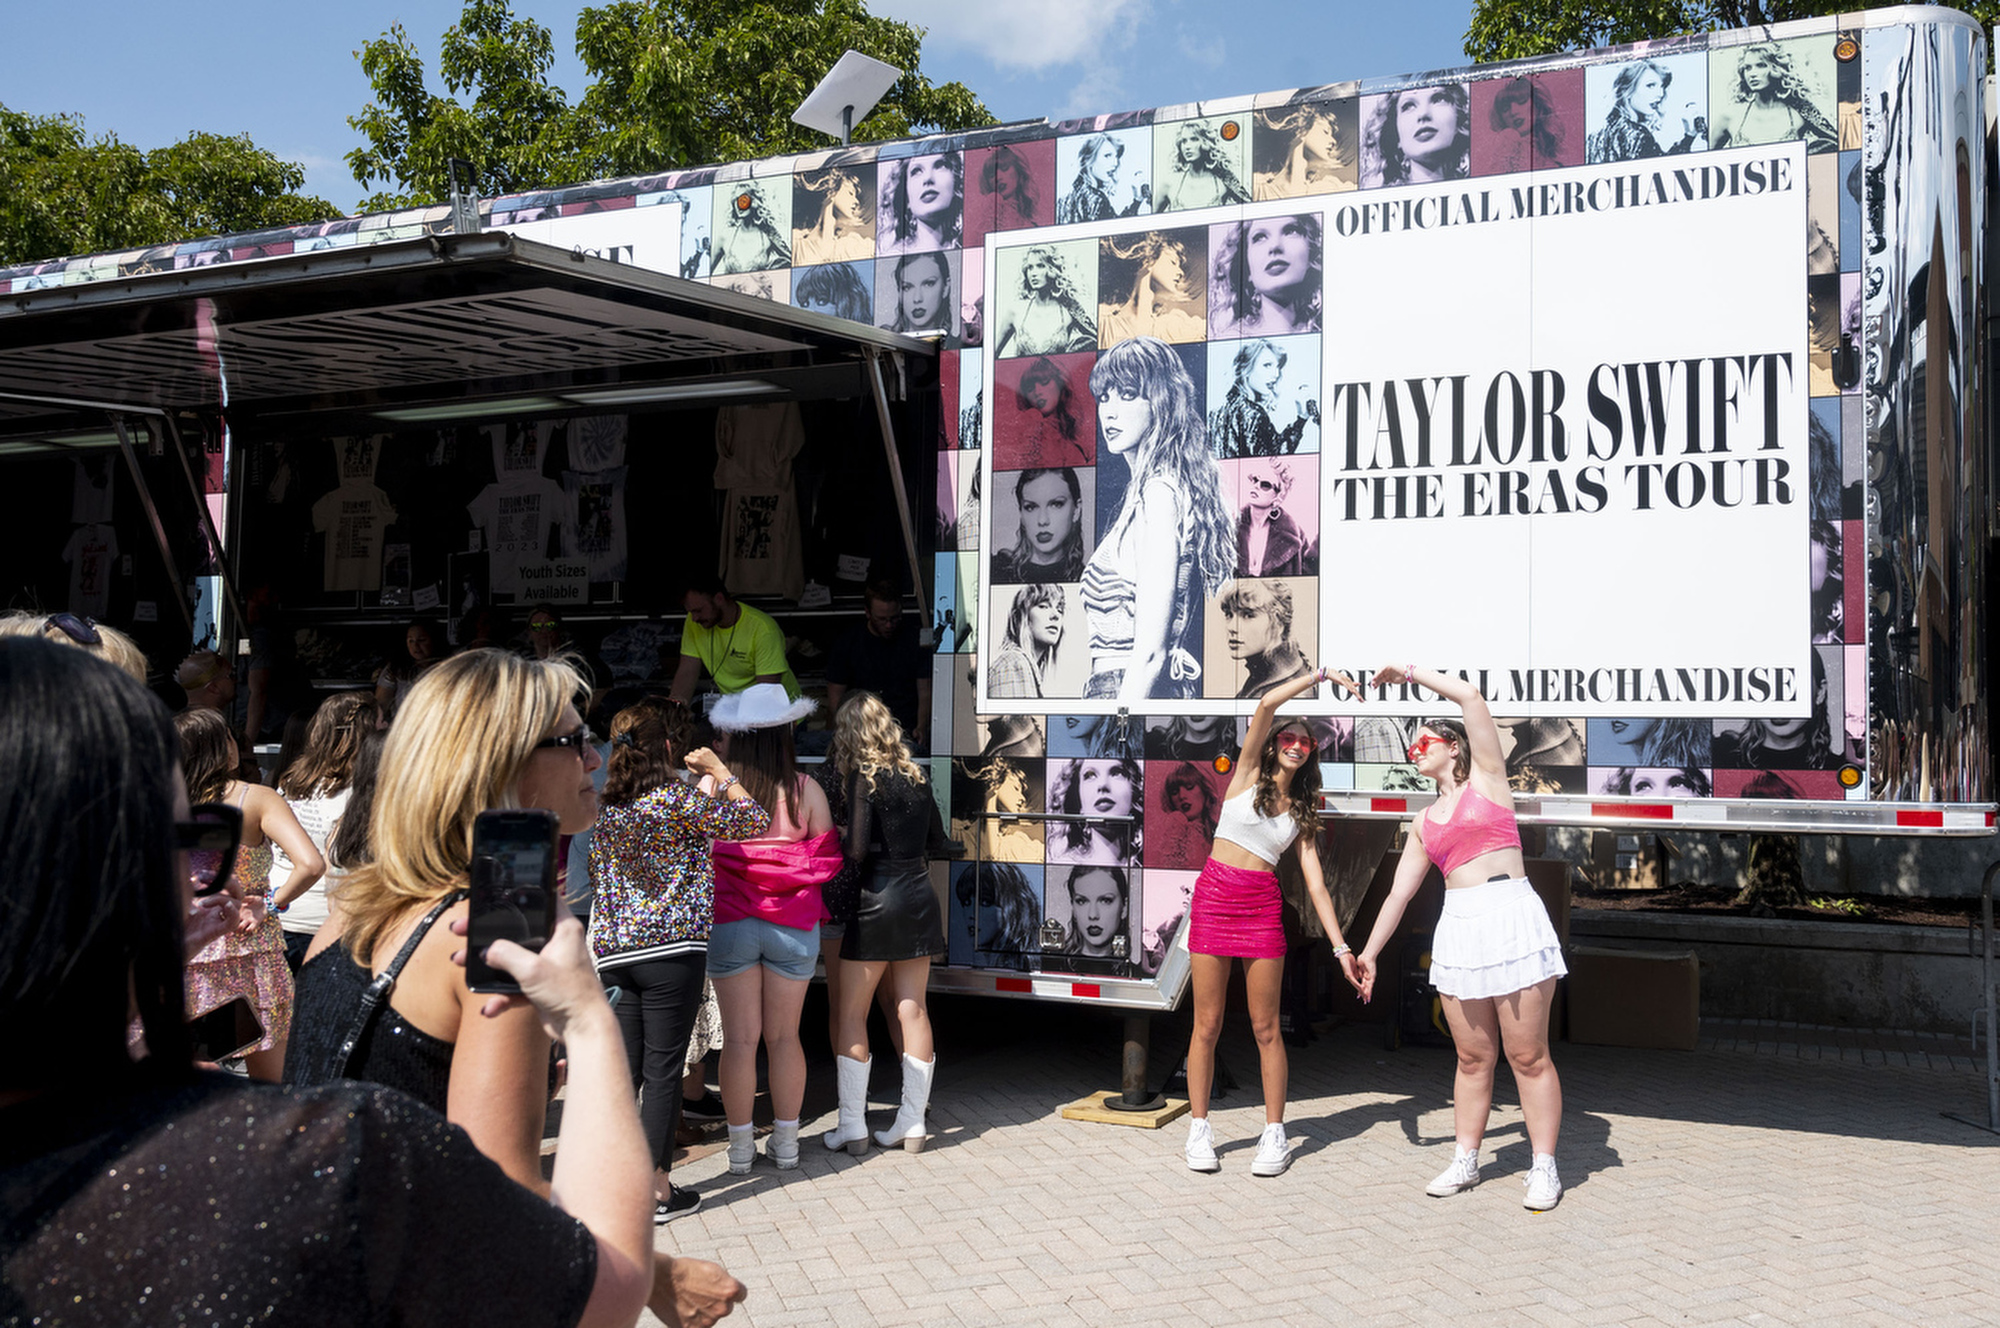 Taylor Swift's merch truck is in Houston. Here's what you need to know